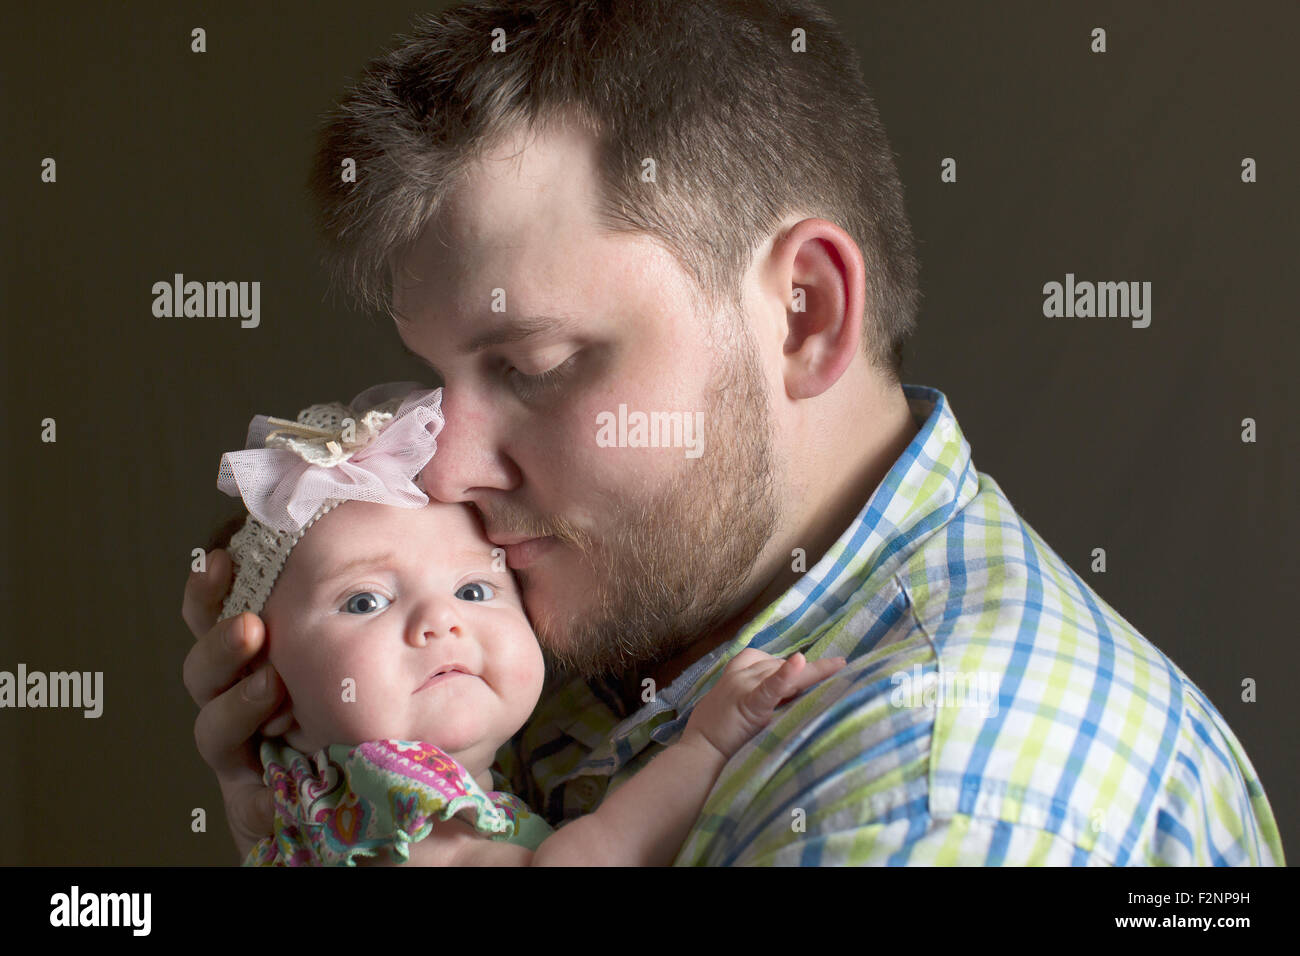 Caucasian father holding daughter Stock Photo